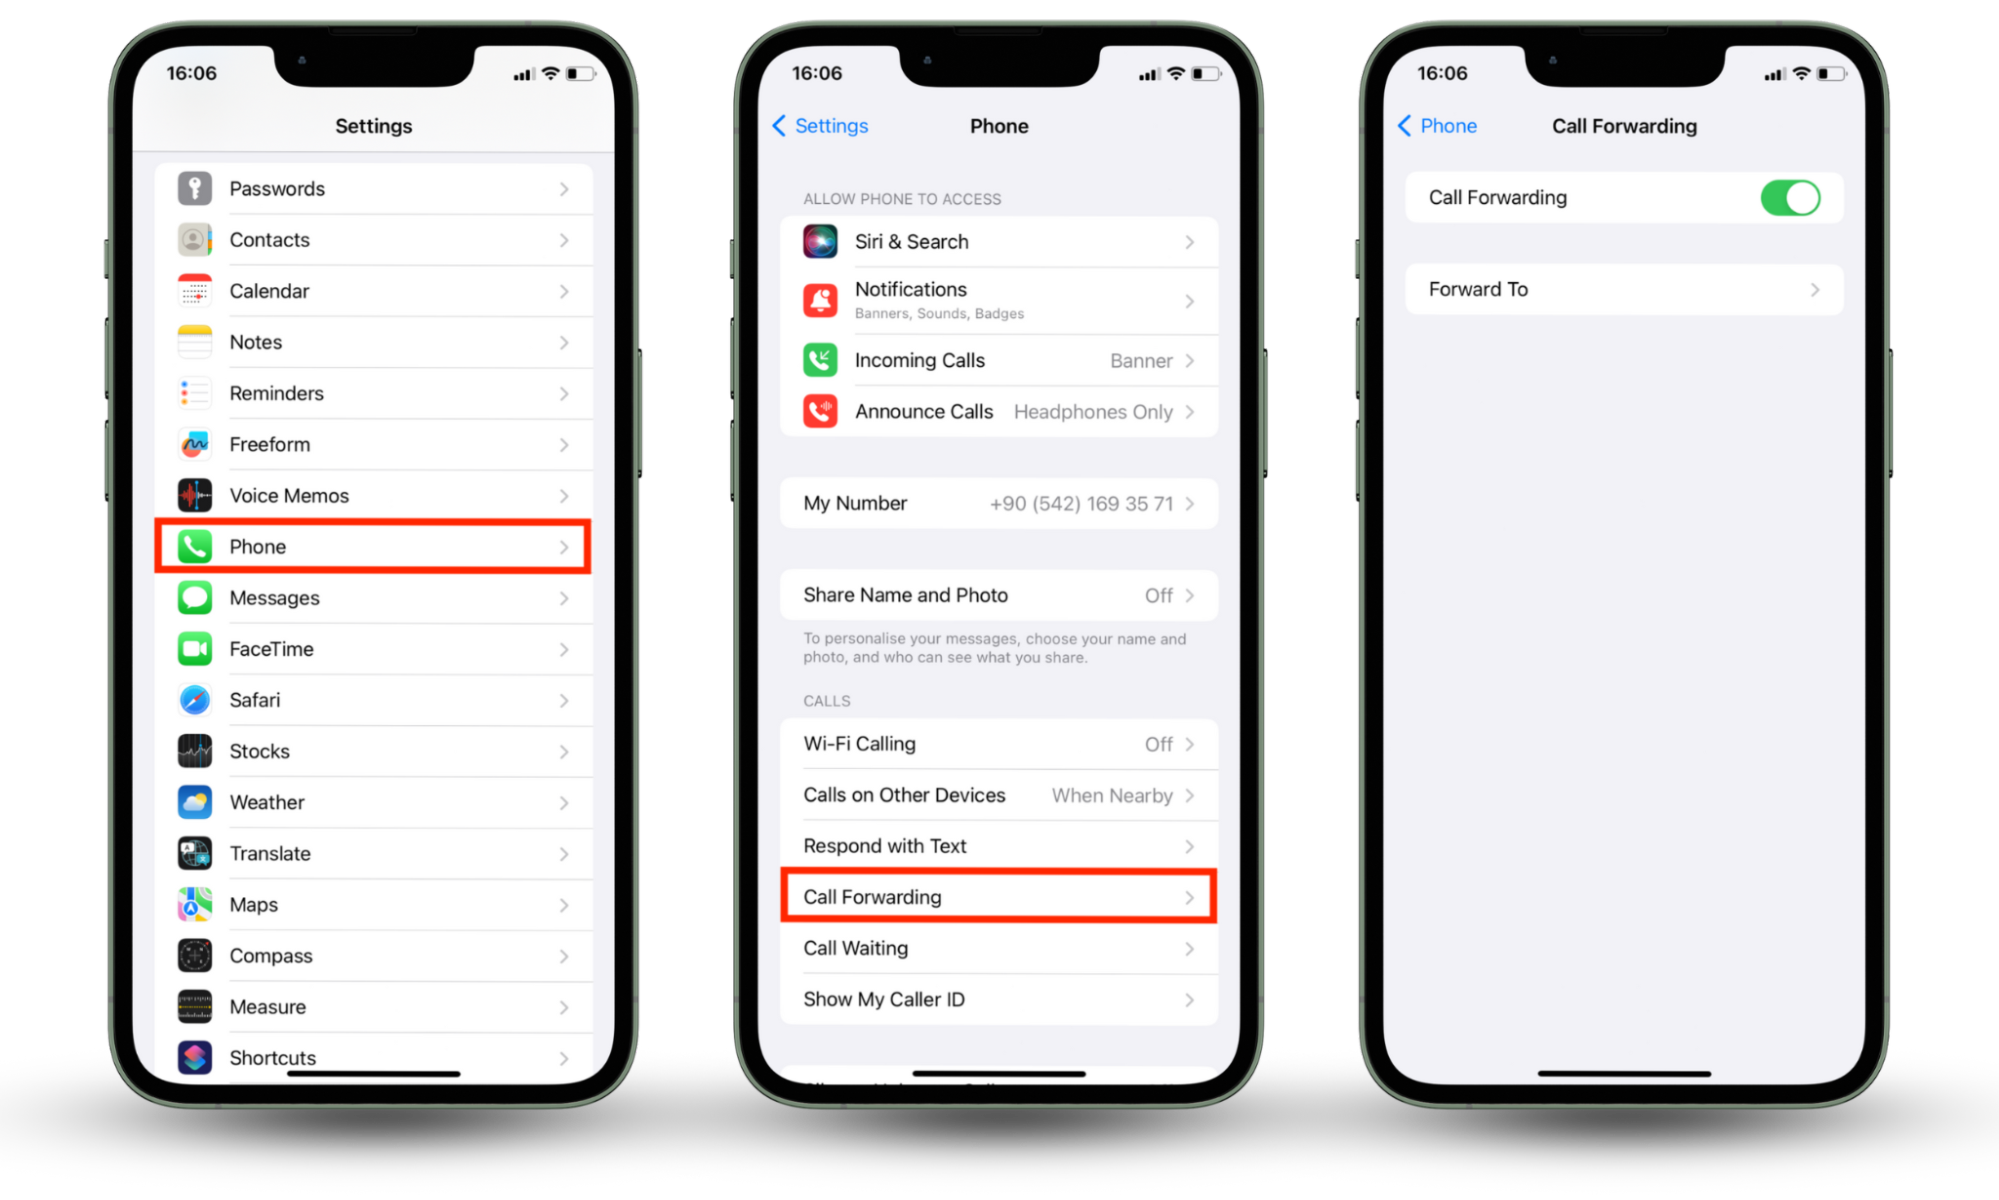 Disable call forwarding to prevent spying. On an iPhone, go to Settings, tap Phone > Call Forwarding, and disable it by turning the toggle off.